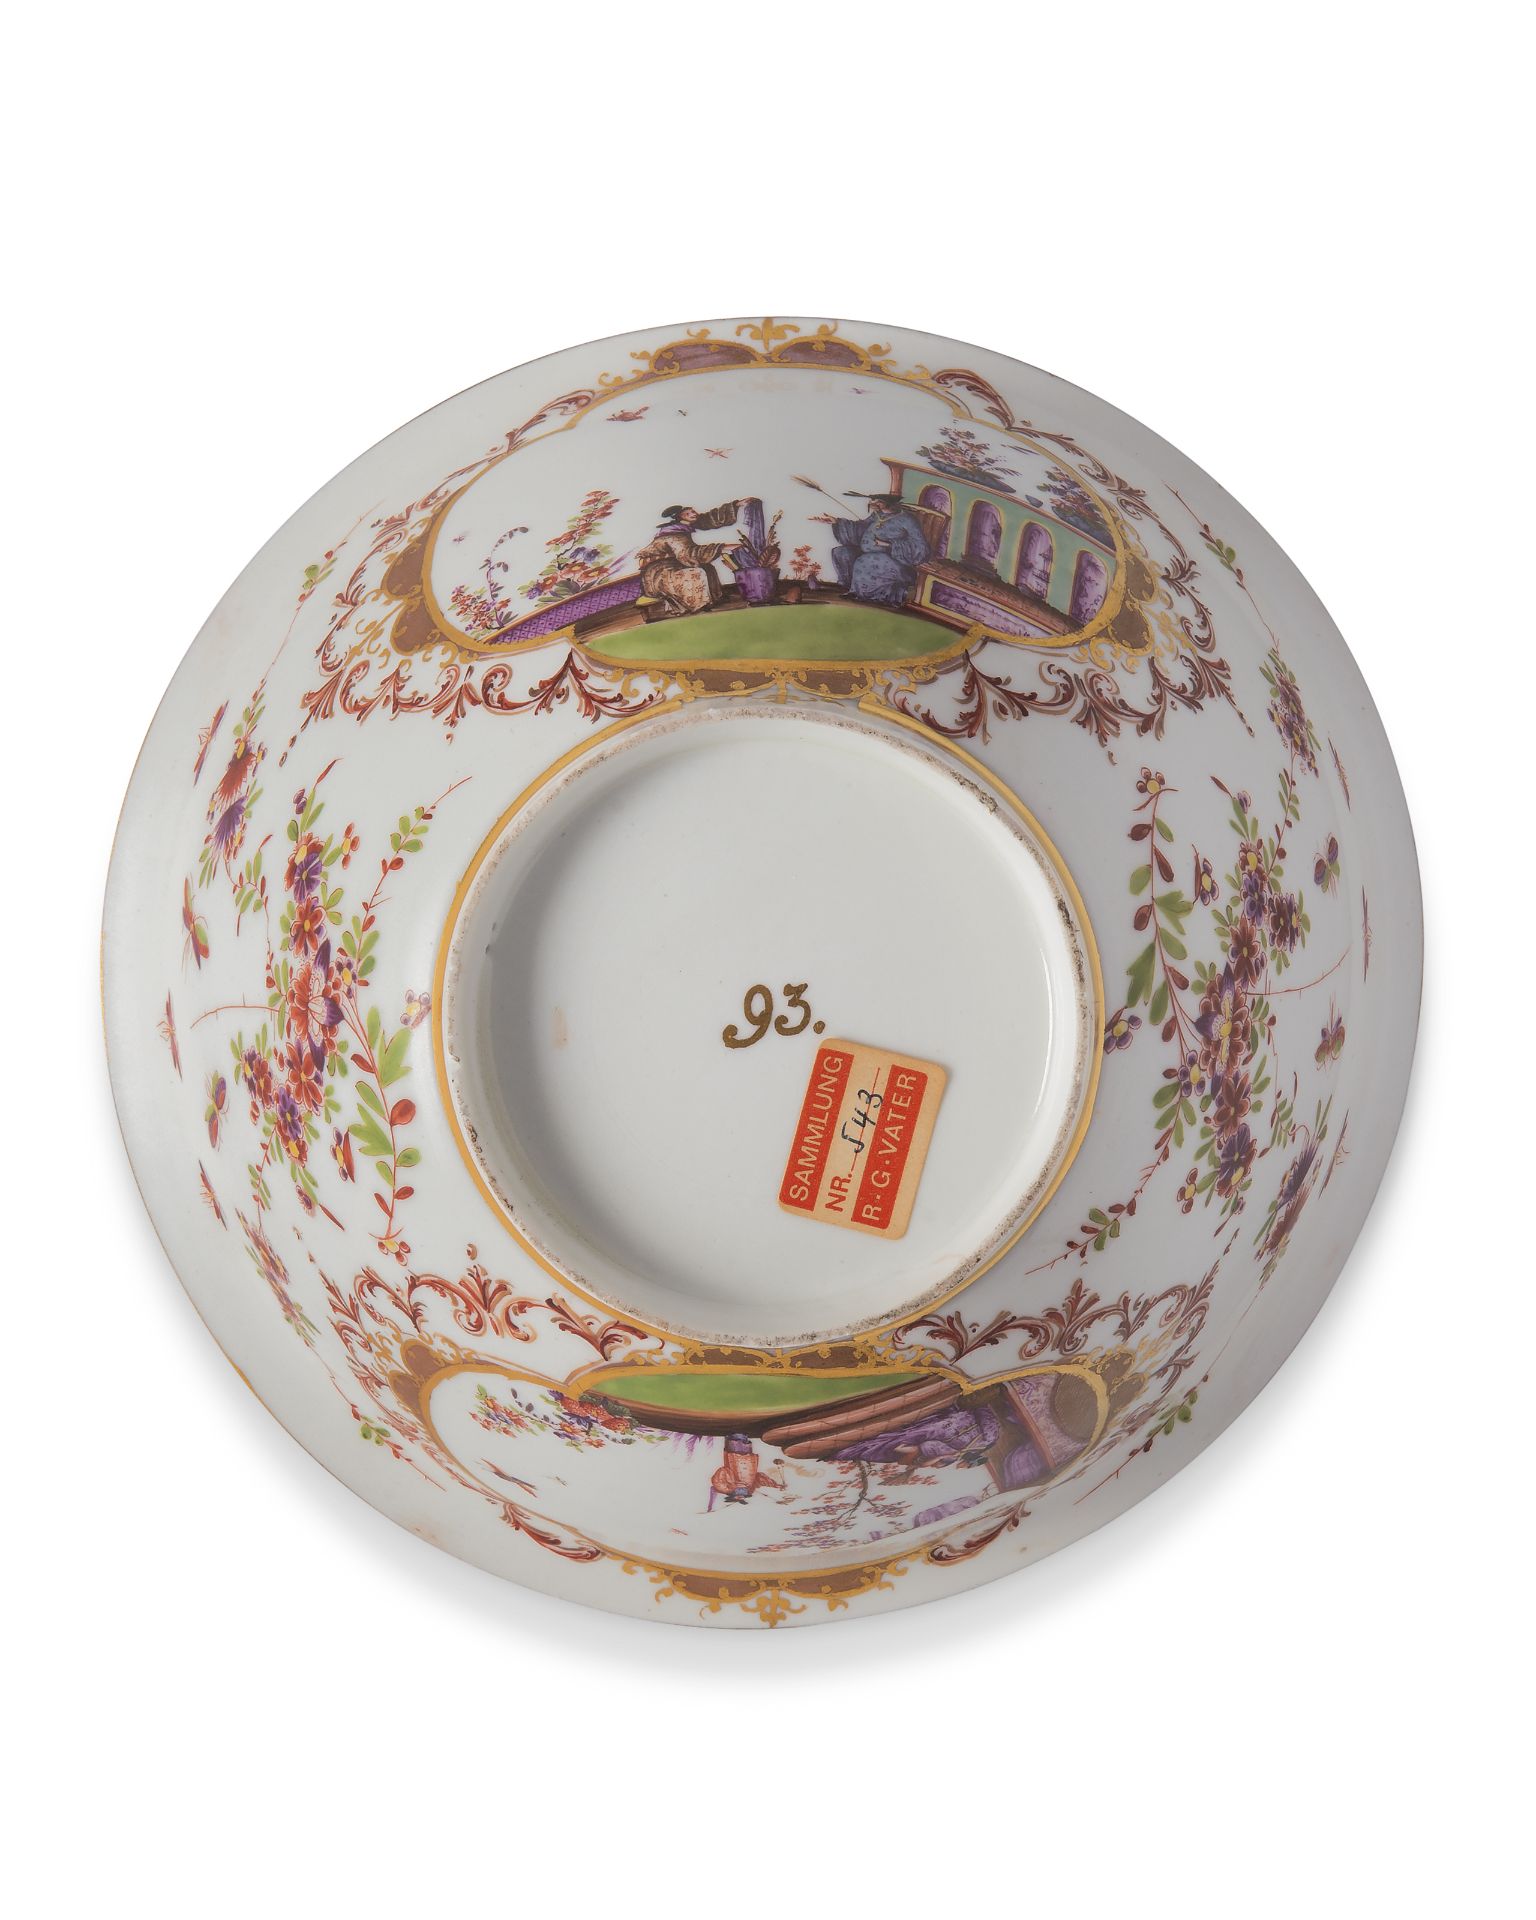 A Meissen porcelain chinoiserie waste-bowl, c.1724, gilders 93. mark, painted in the manner of J.... - Image 4 of 4